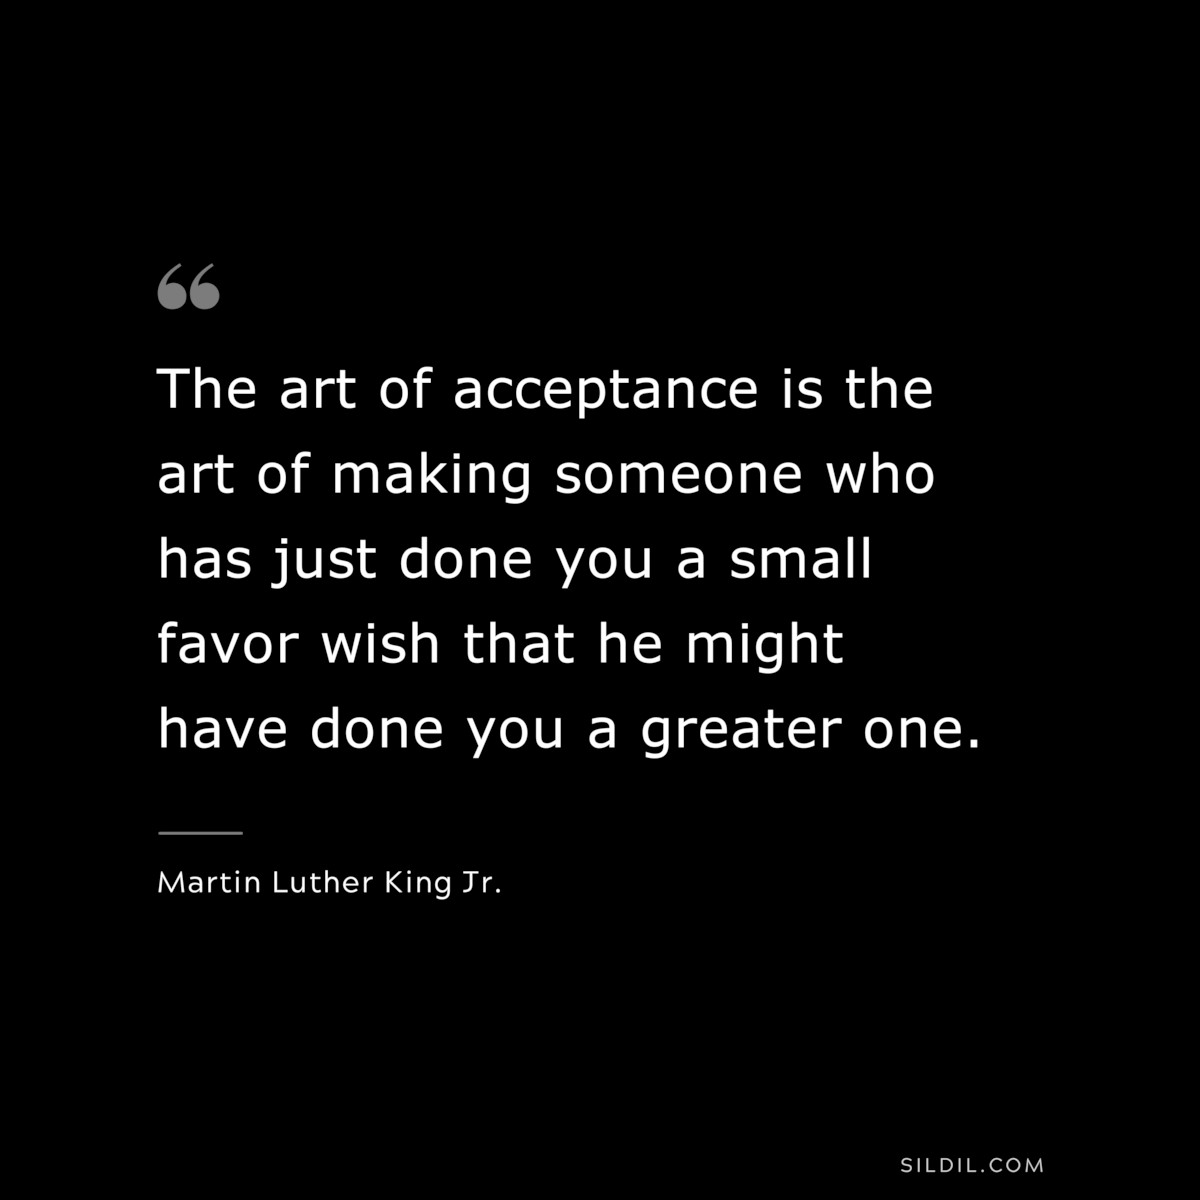 The art of acceptance is the art of making someone who has just done you a small favor wish that he might have done you a greater one. ― Martin Luther King Jr.